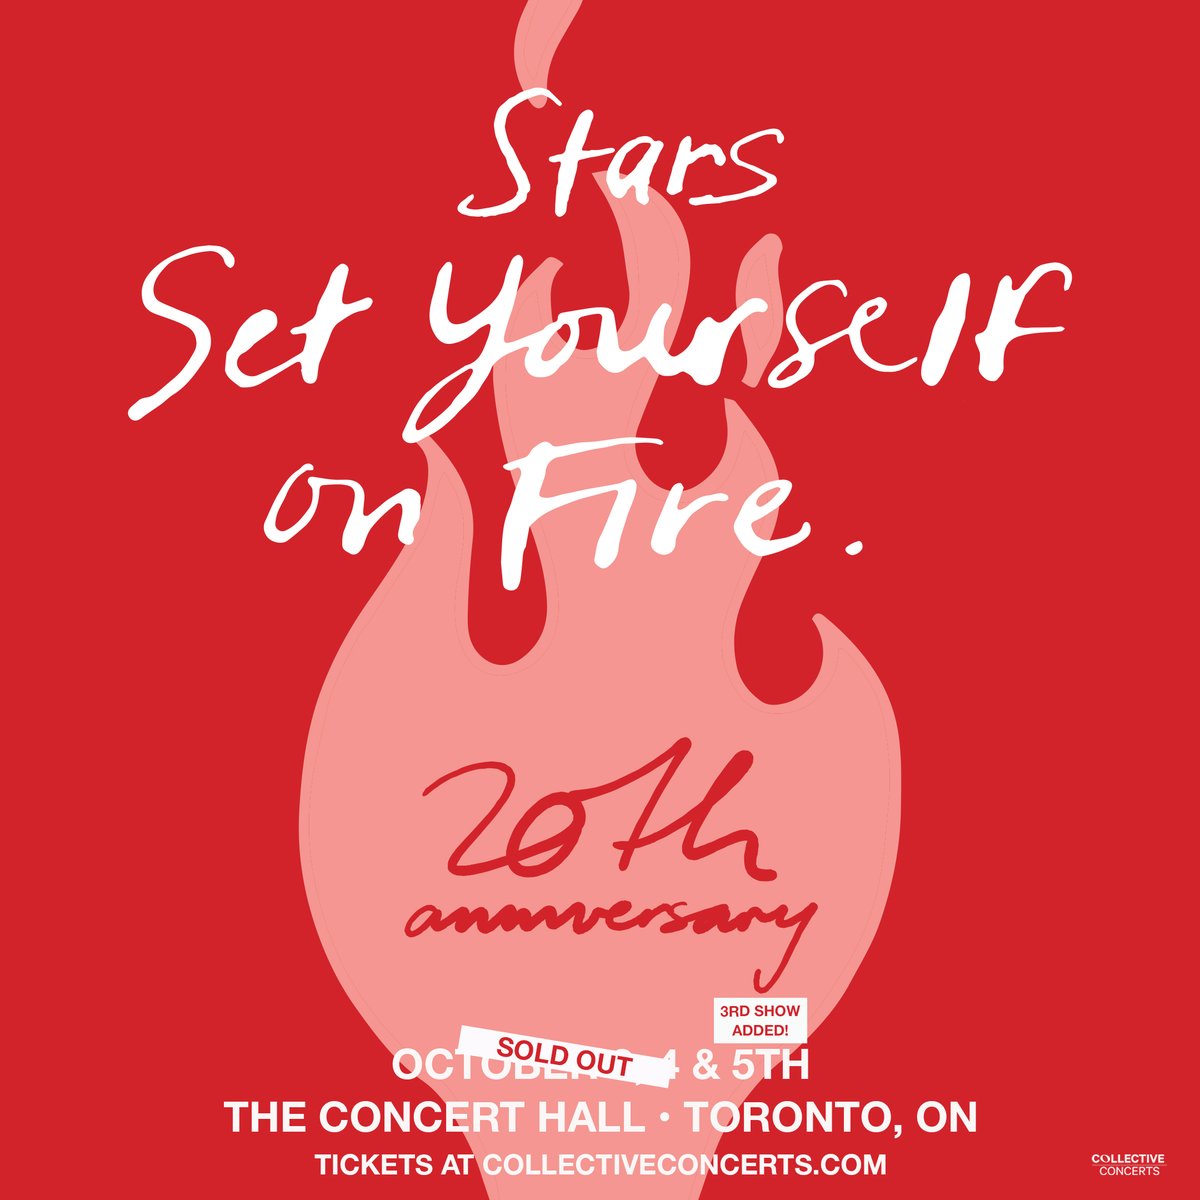 Due to spectacular demand, @youarestars have added a third show at The Concert Hall on October 5th in celebration of the monumental record Set Yourself on Fire! Tickets are on sale right now so don't wait, get them at link.dice.fm/He257080a714